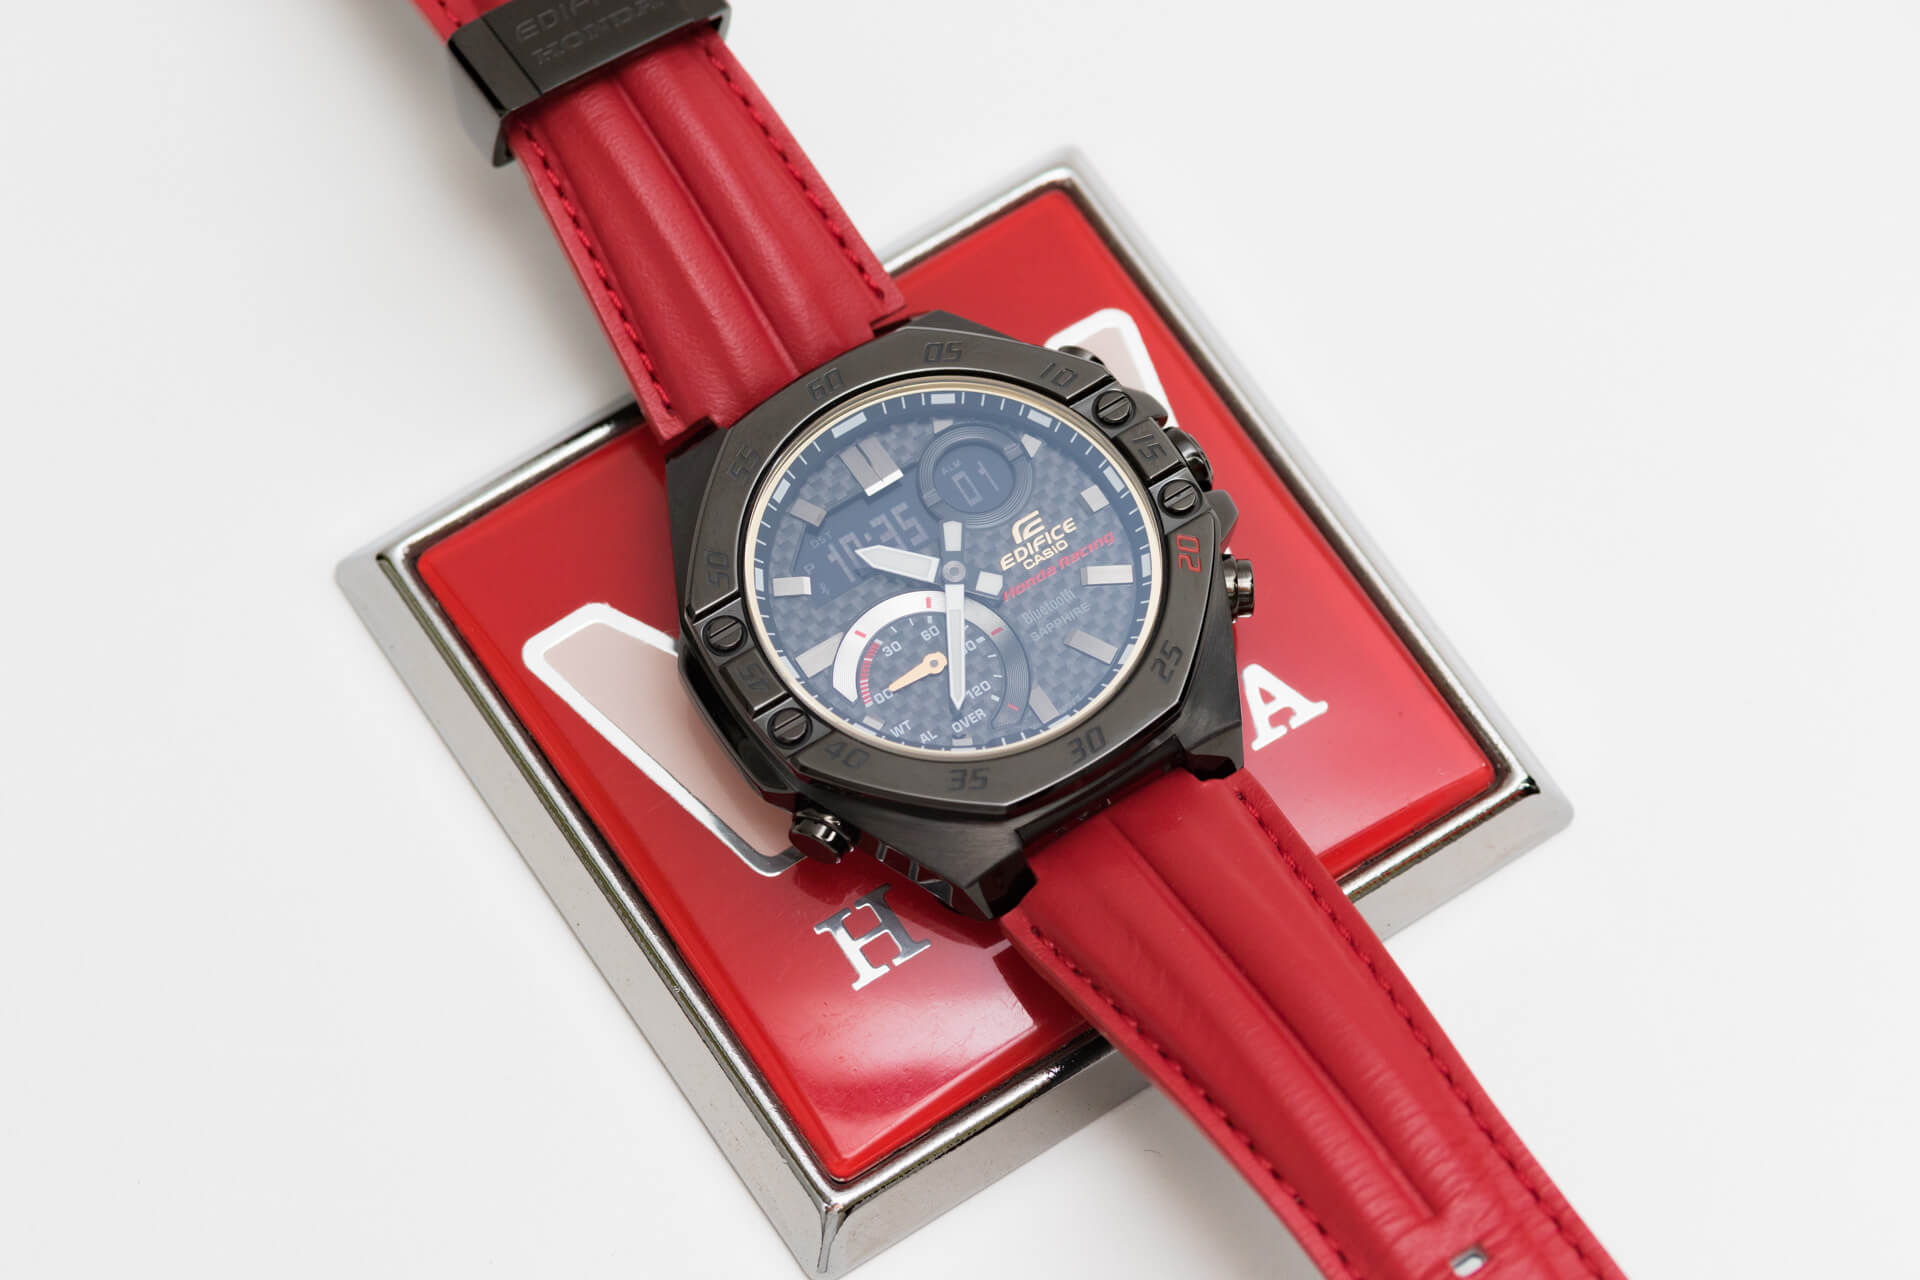 Watch Review: Casio Edifice Honda Racing Limited Edition | aBlogtoWatch